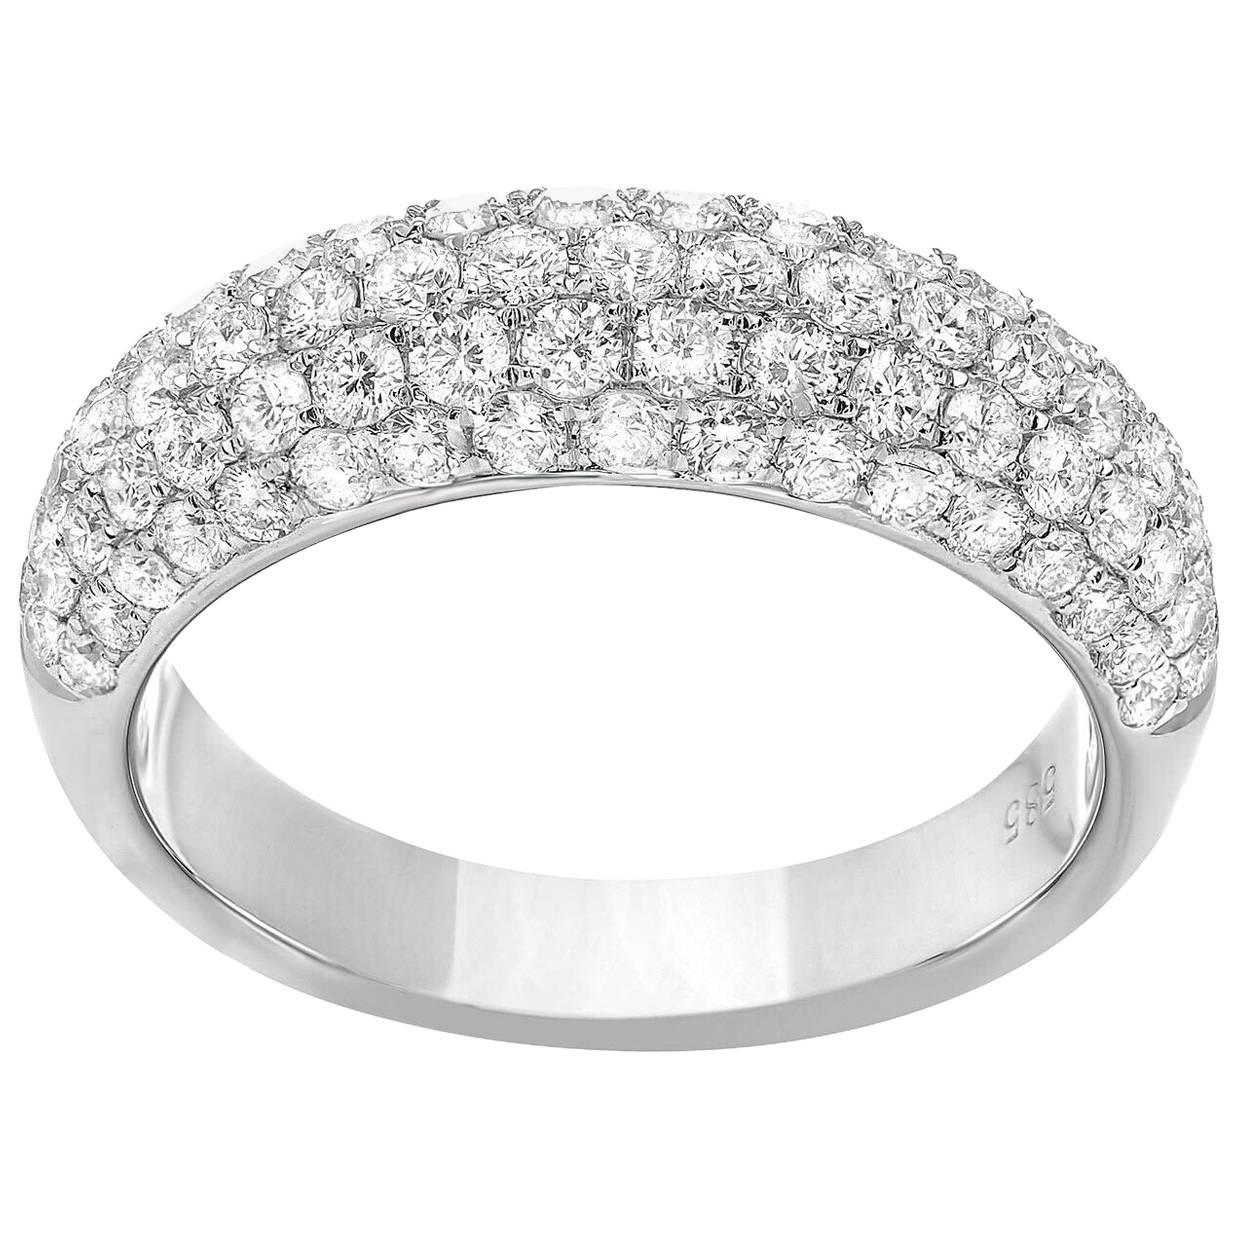 Five-Row Diamond Pave Ring in White Gold For Sale